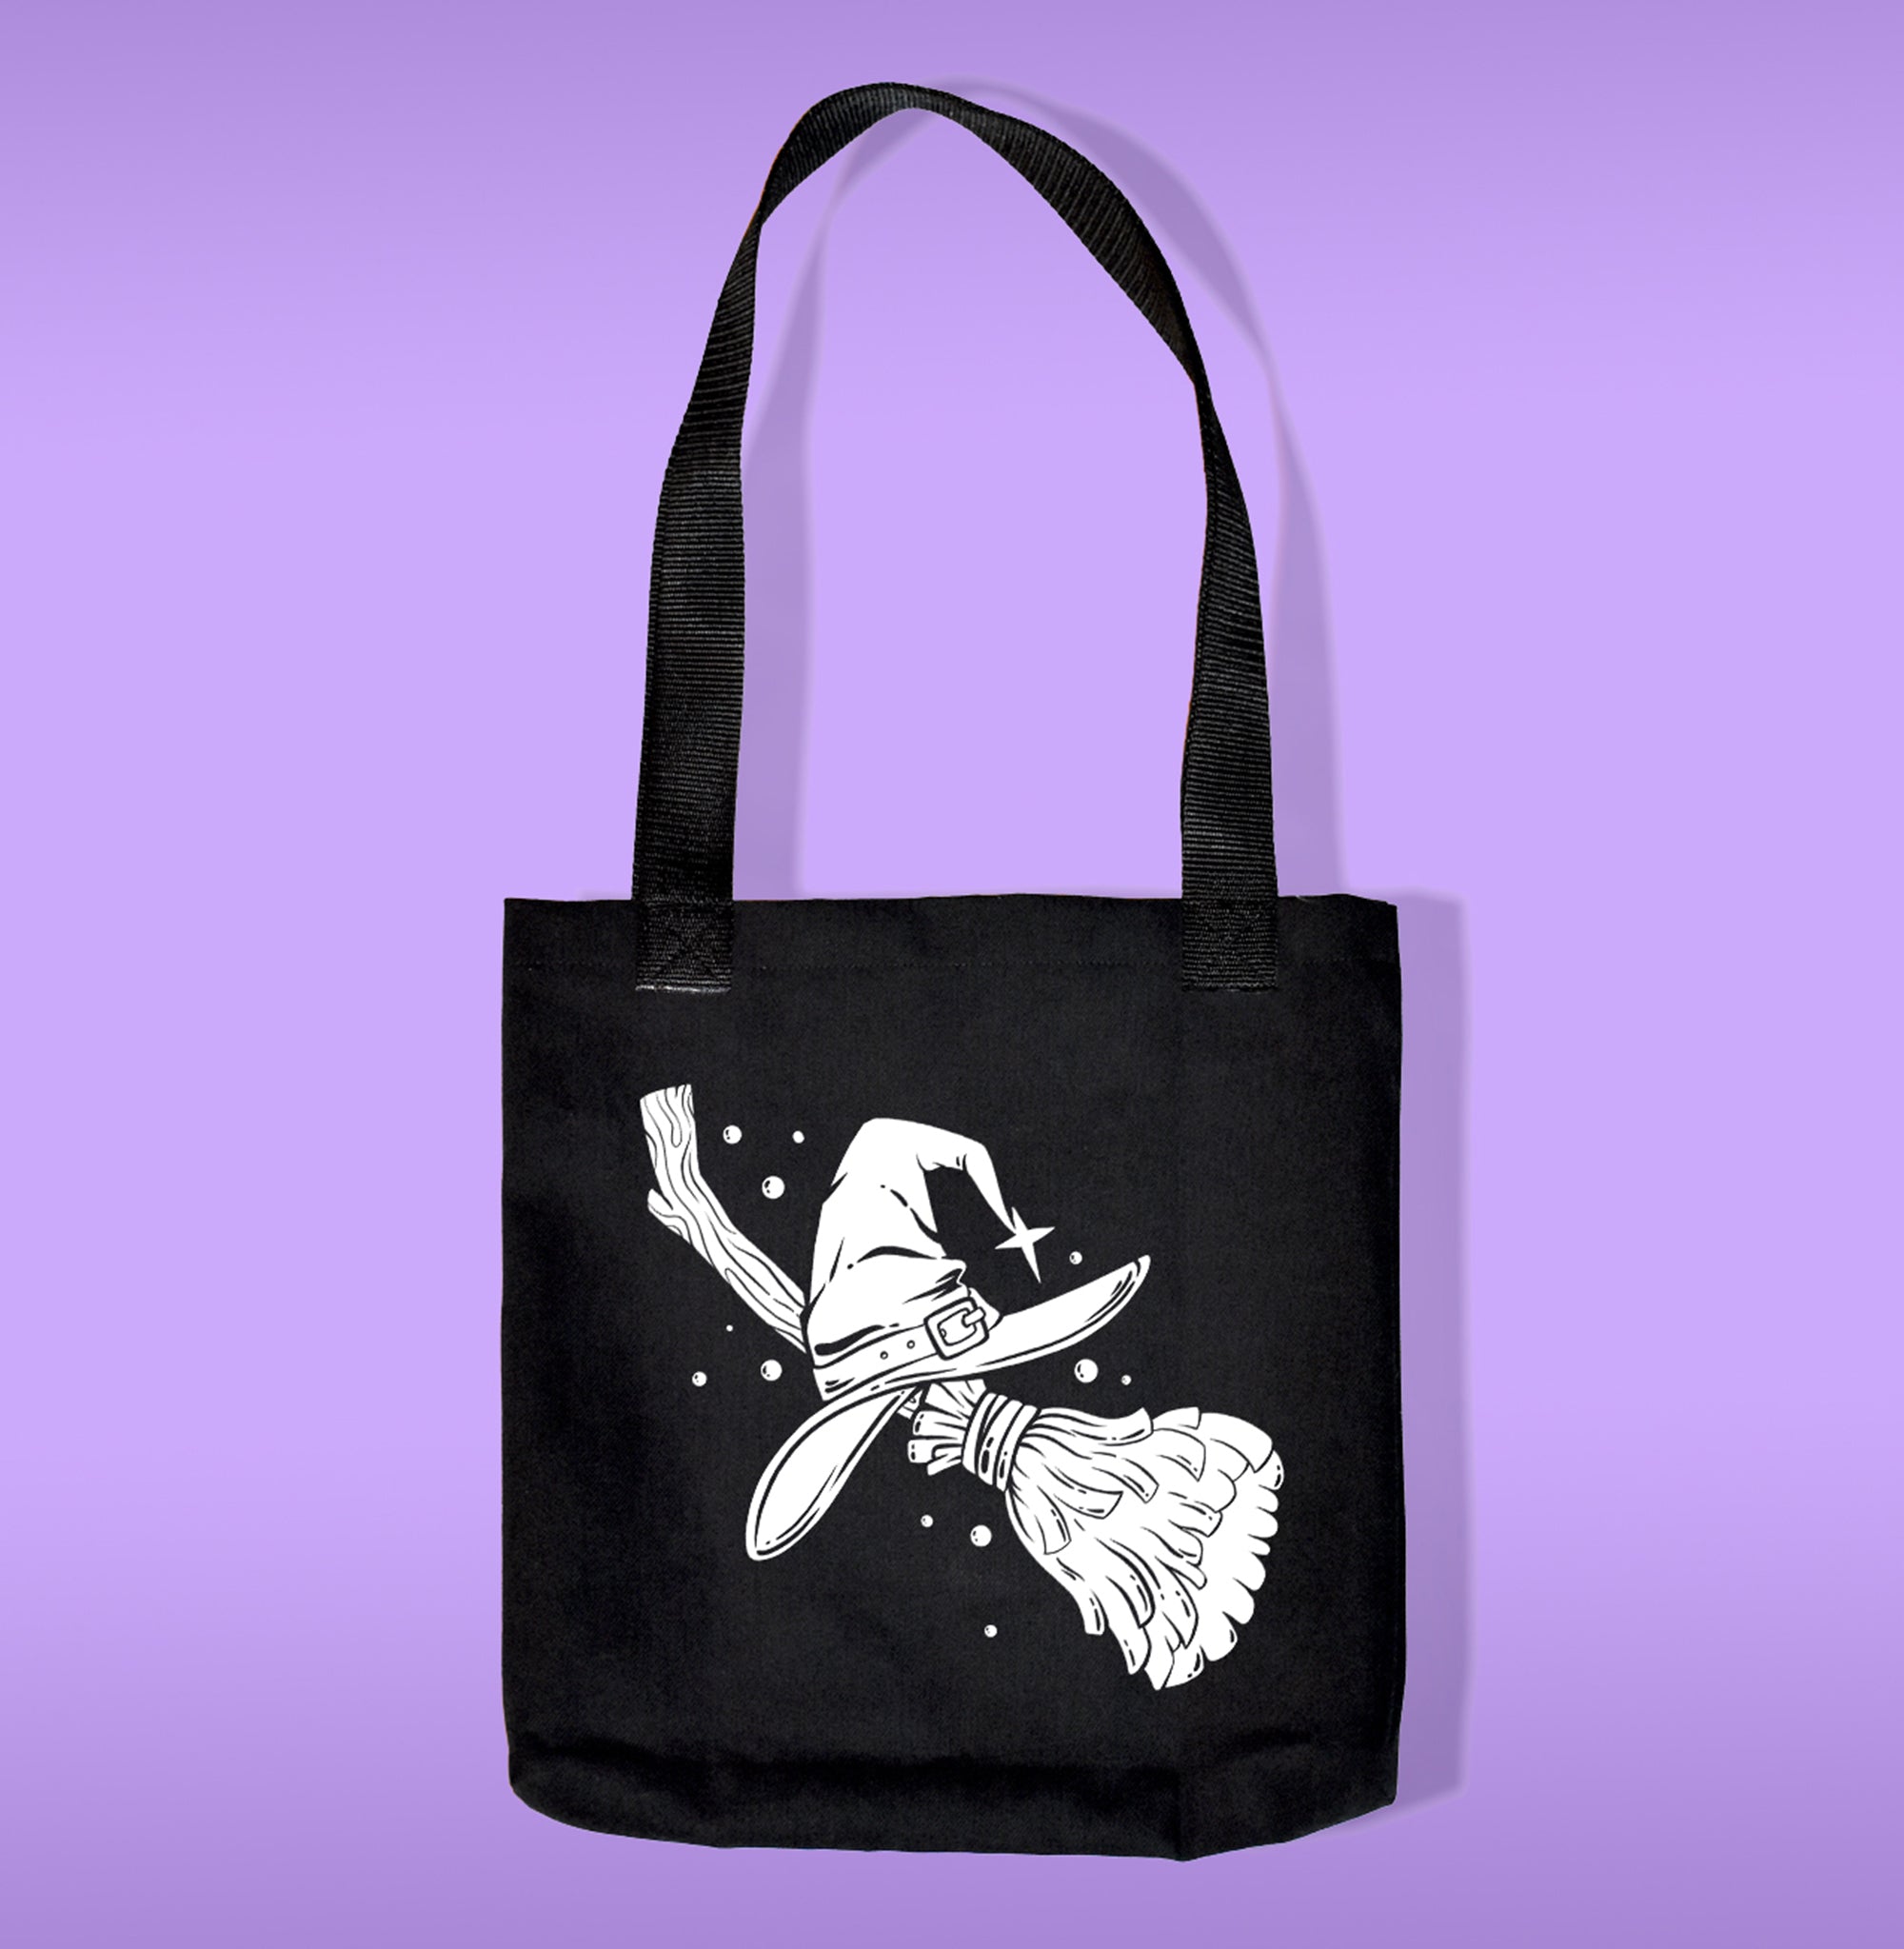 A black canvas bag with polypropelene straps. Features a broom and witch hat heat transfer print